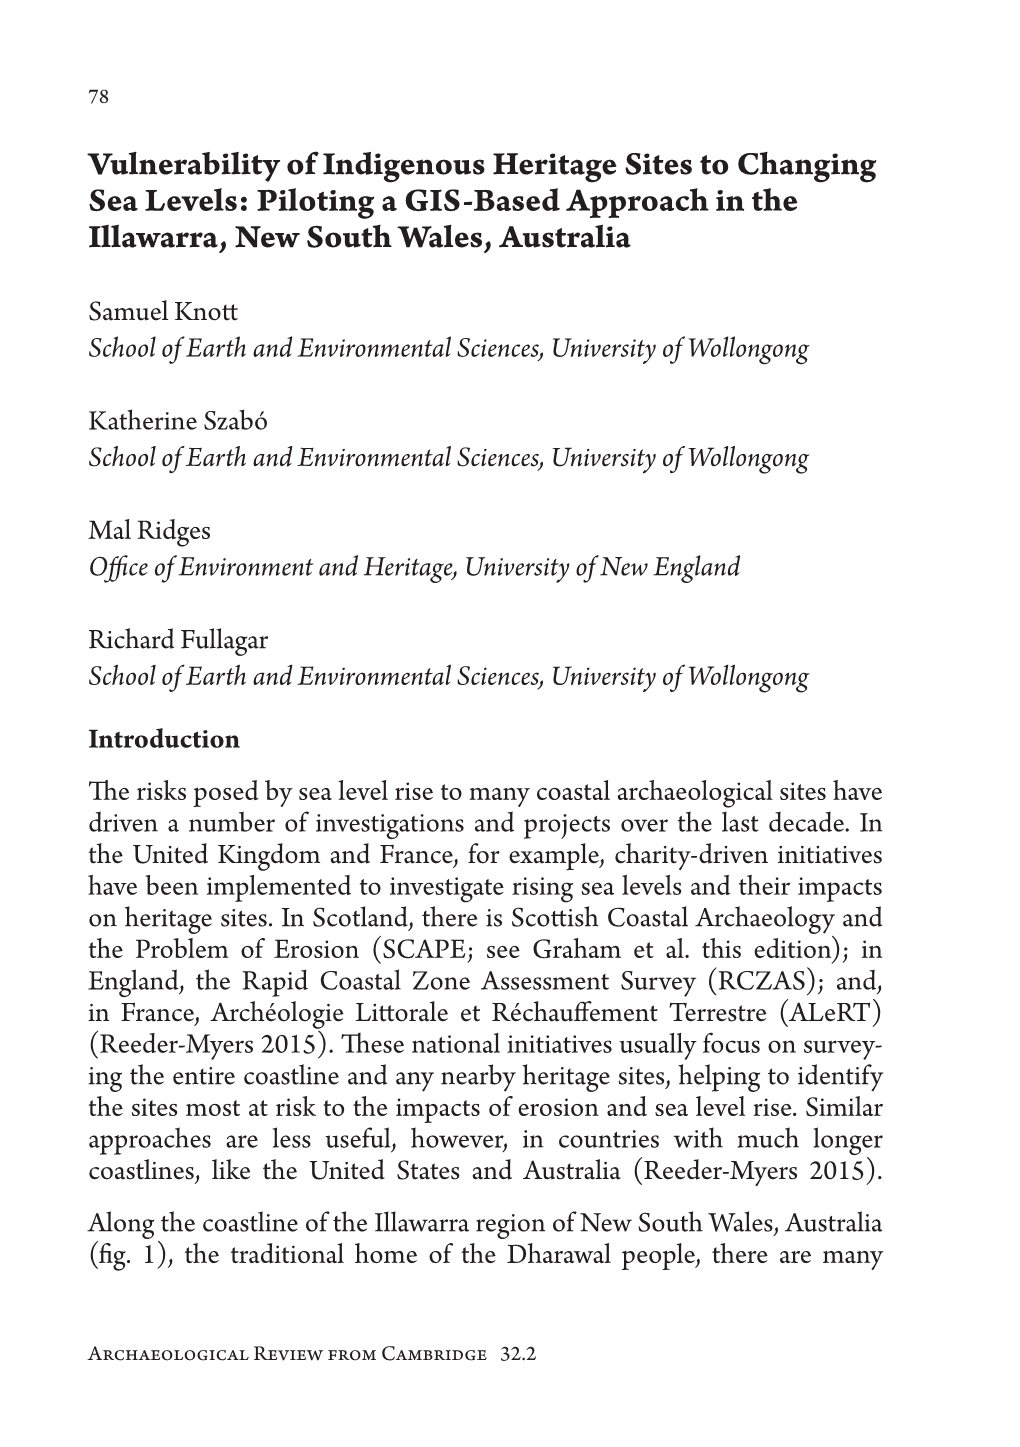 Vulnerability of Indigenous Heritage Sites to Changing Sea Levels: Piloting a GIS-Based Approach in the Illawarra, New South Wales, Australia